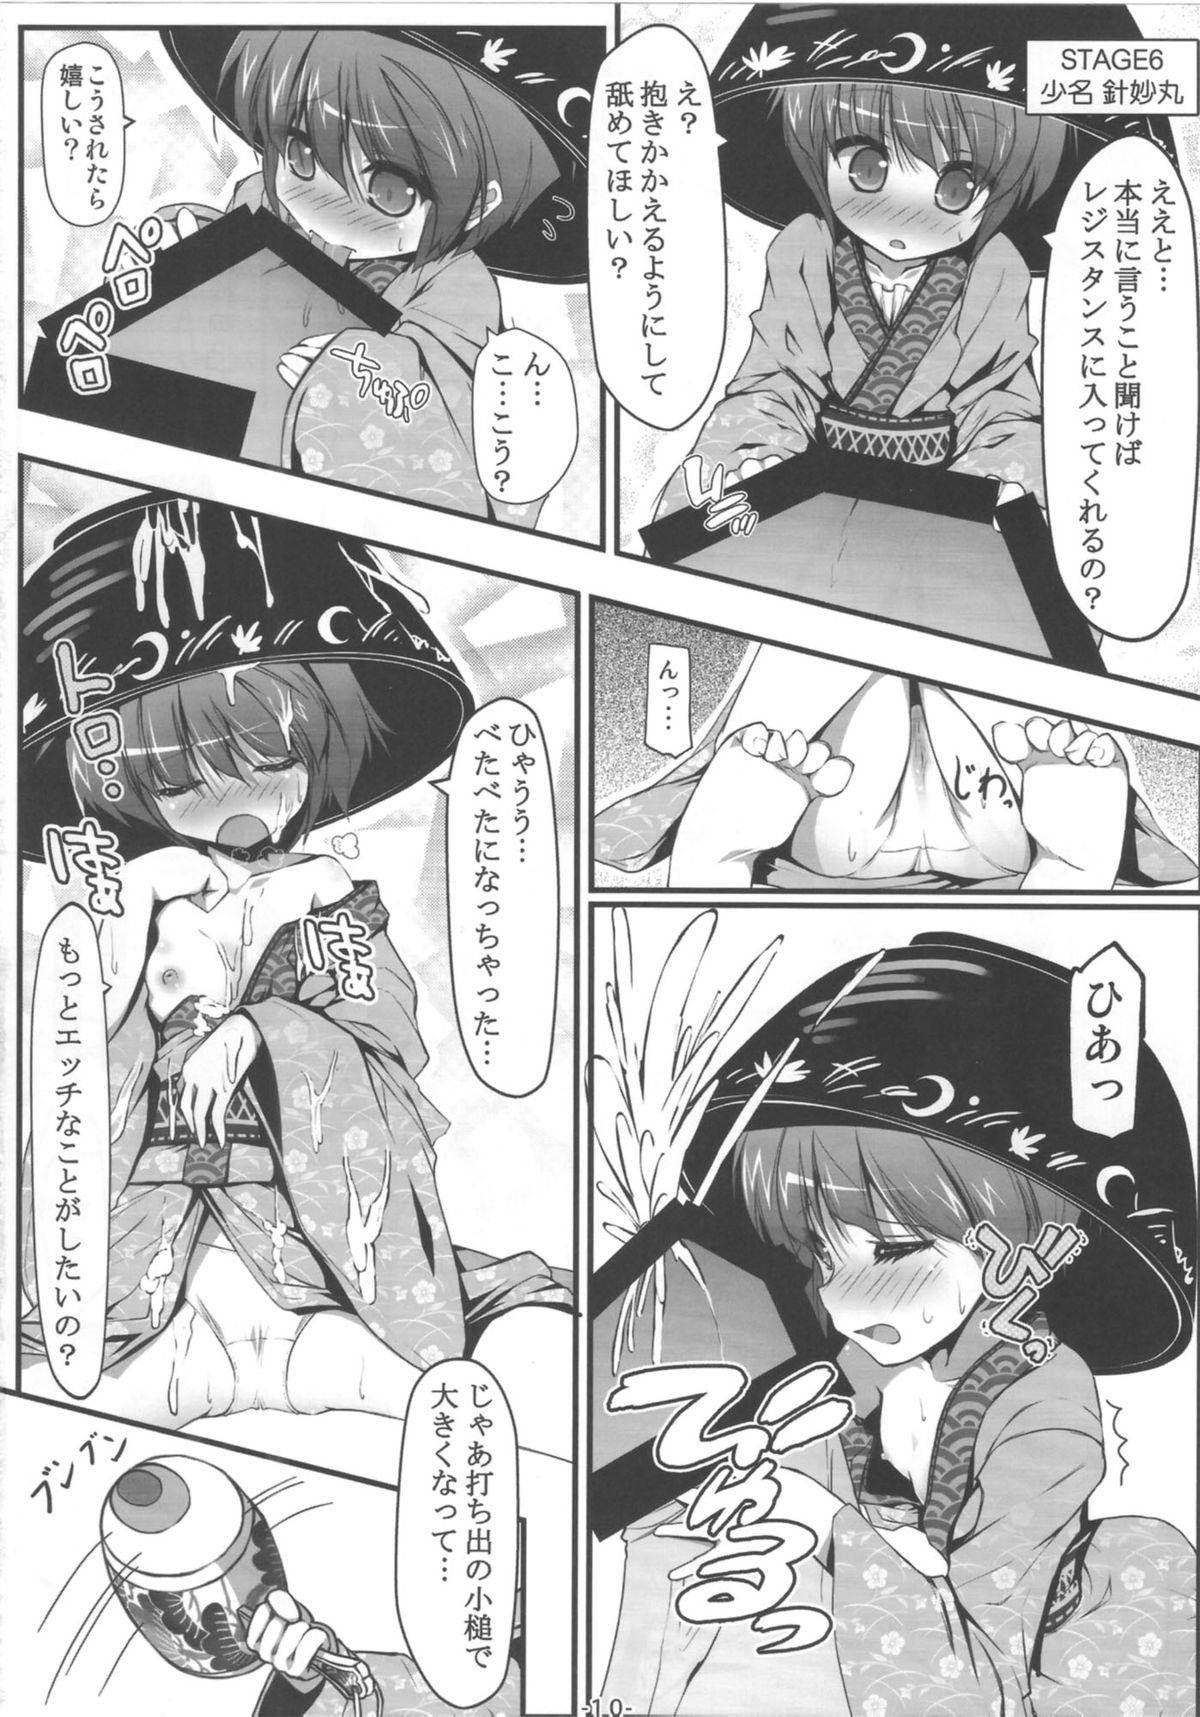 Milfporn Ookikuna ~ Re!? - Touhou project Office - Page 11